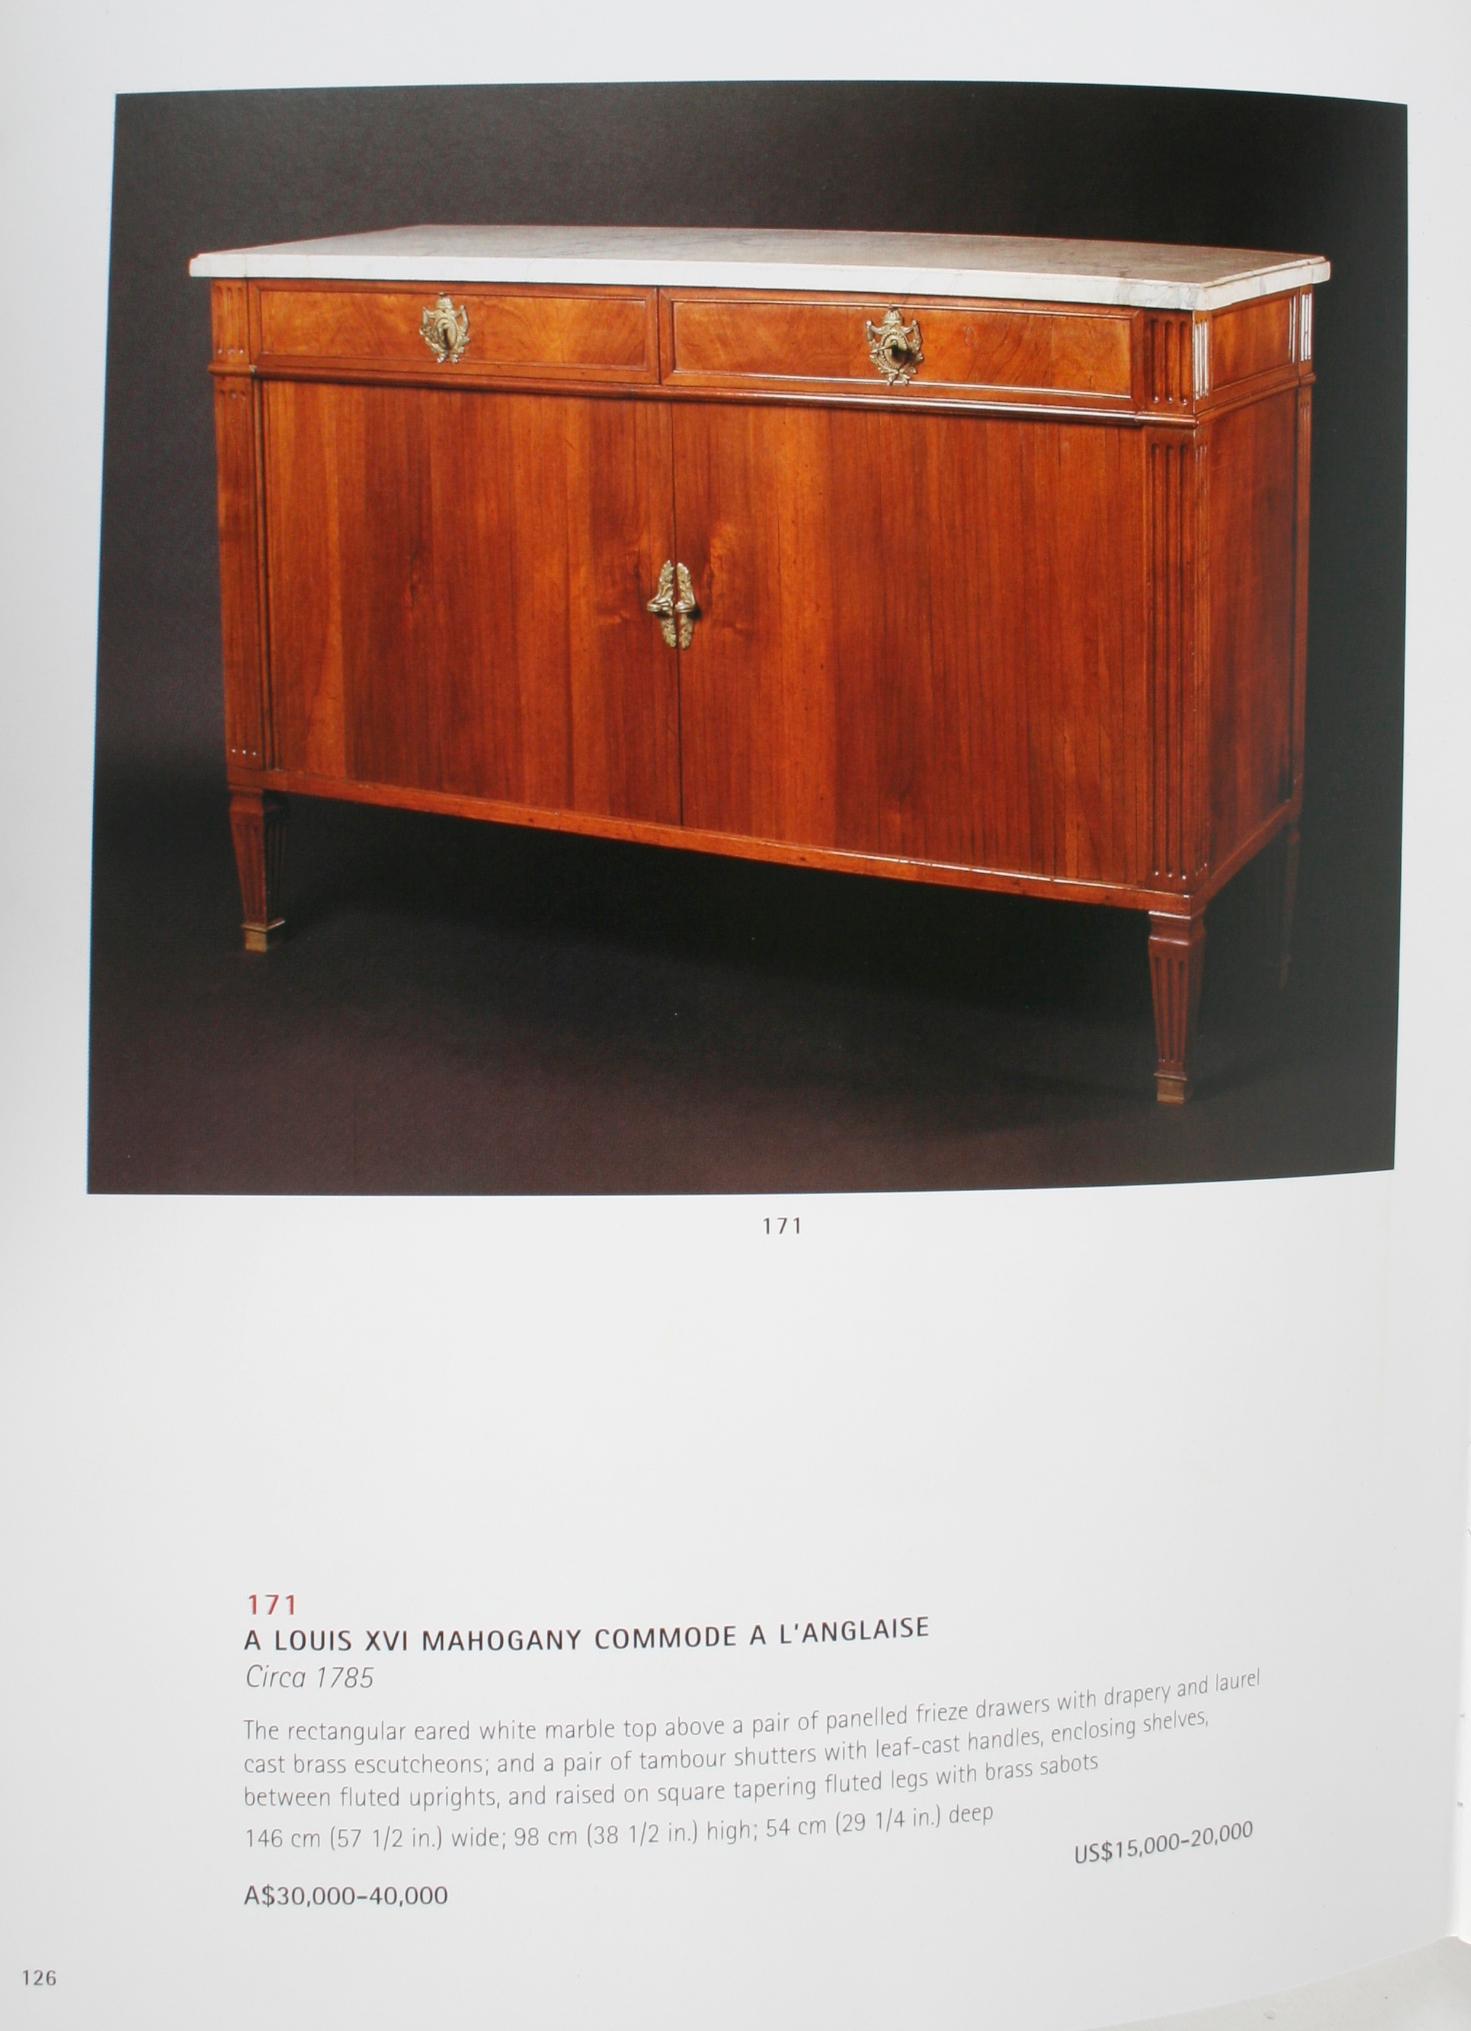 Christies avril 2002 French Furniture & Decorative Arts, a & C Fink Collections en vente 9